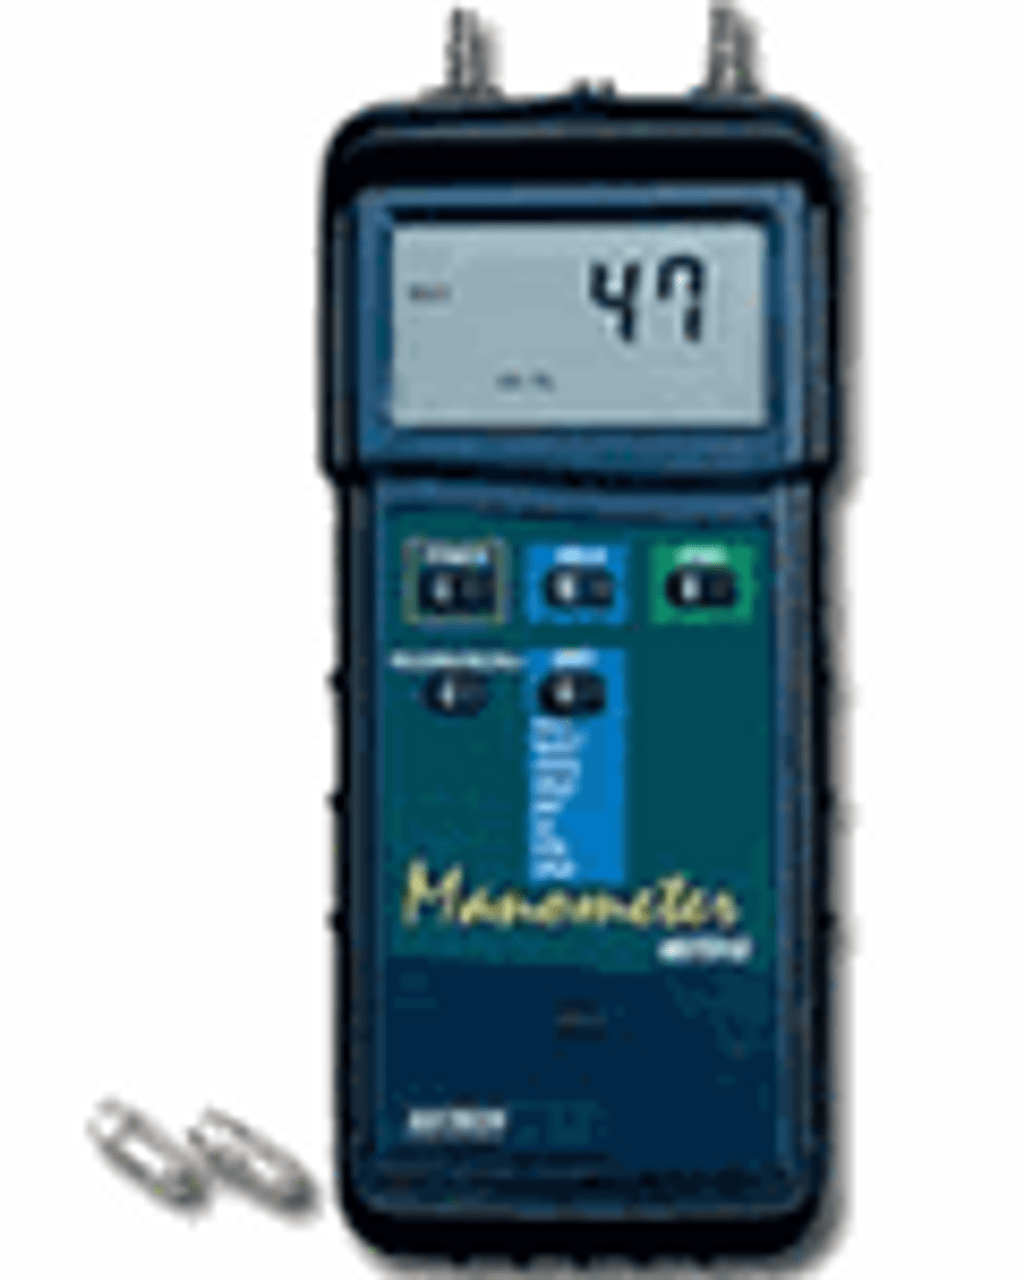 Clearance/Demo - Extech Heavy Duty Differential Pressure Manometer